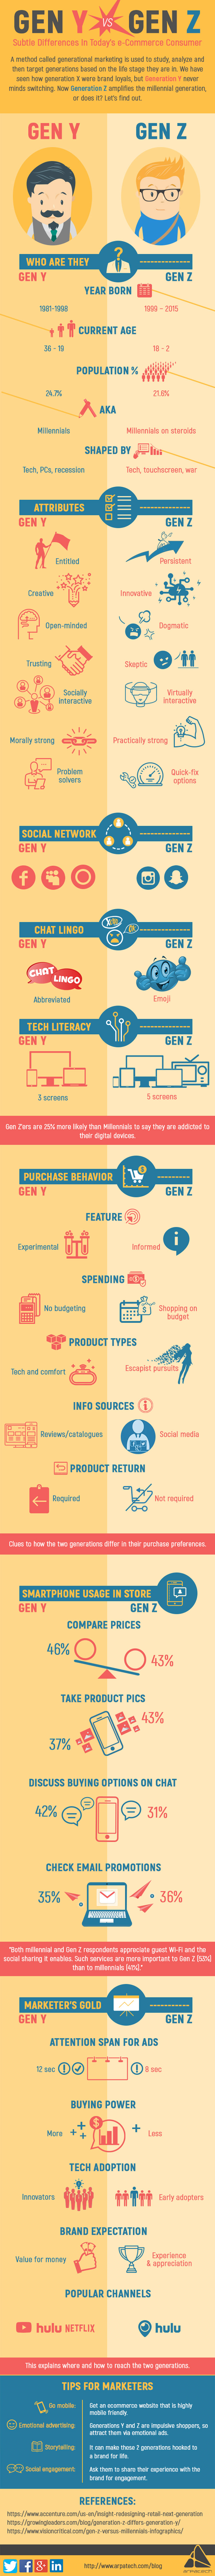 Generation Y vs Gen Z – Subtle Differences Between Today’s e-Commerce Consumers